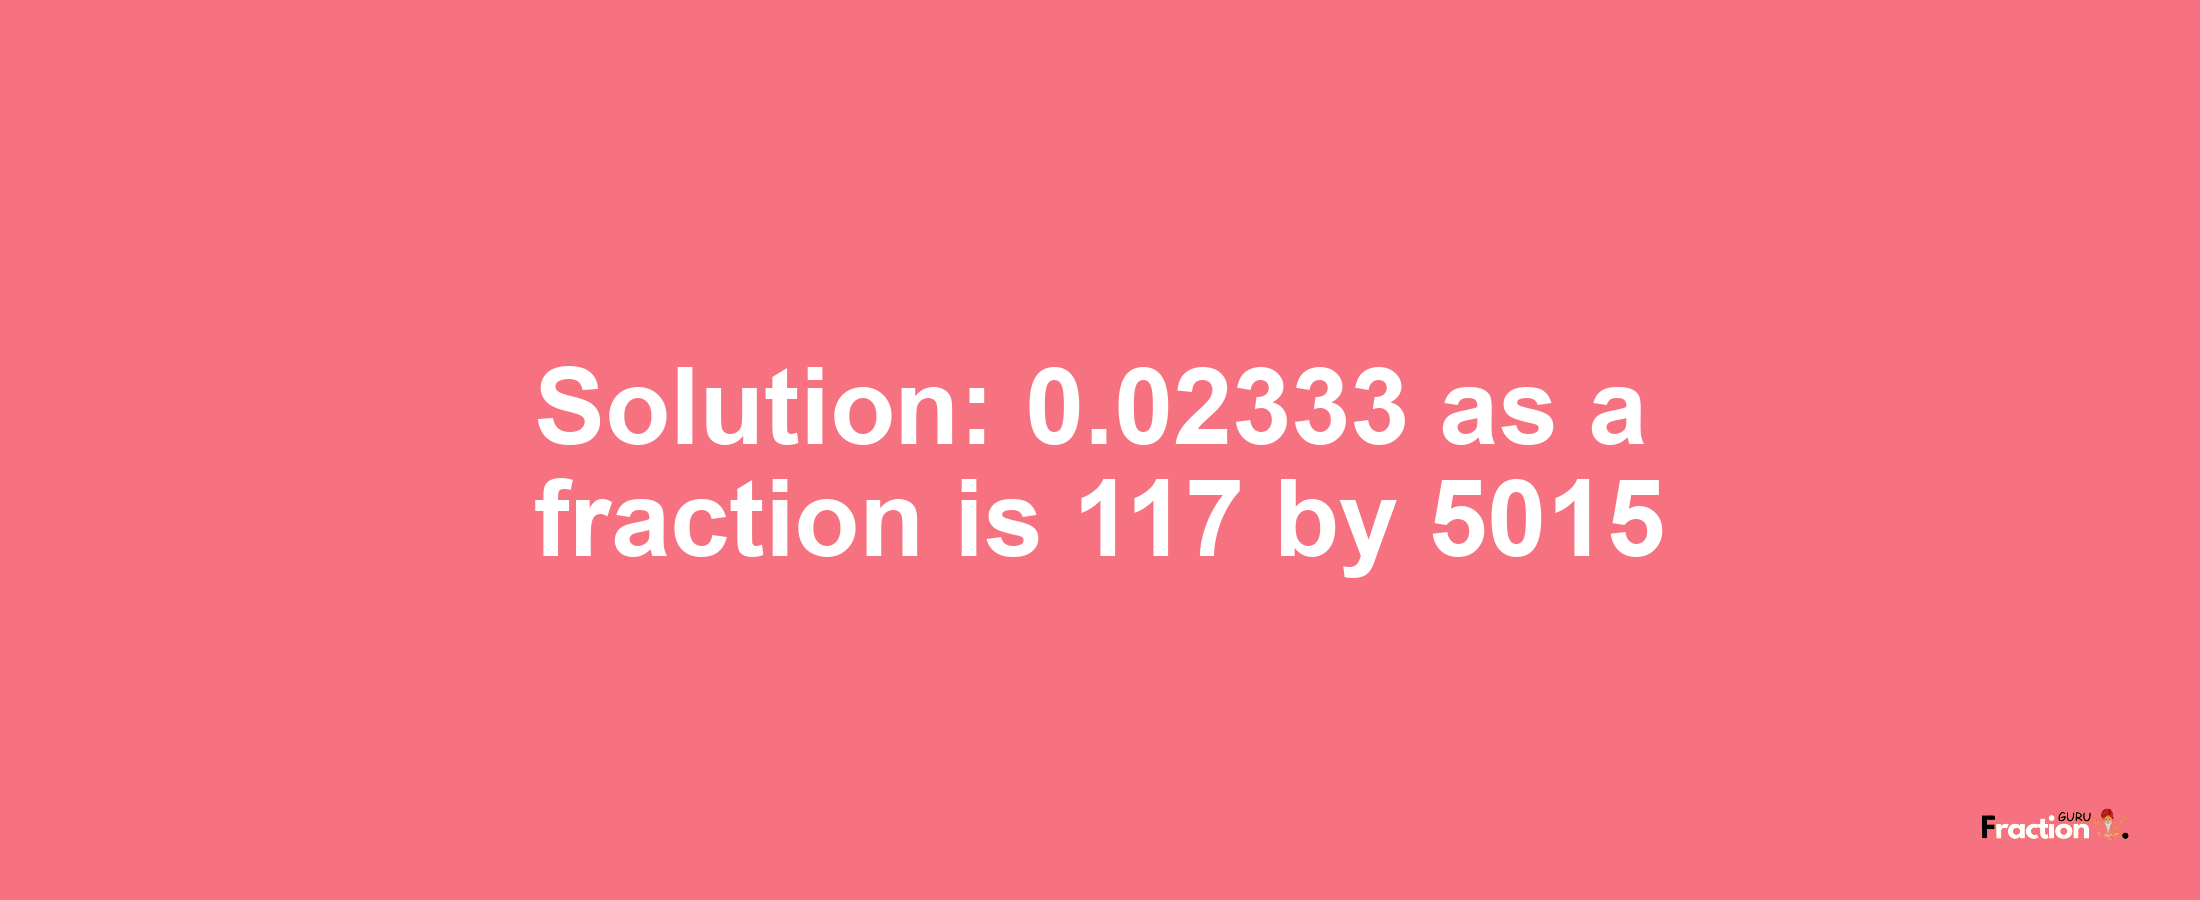 Solution:0.02333 as a fraction is 117/5015